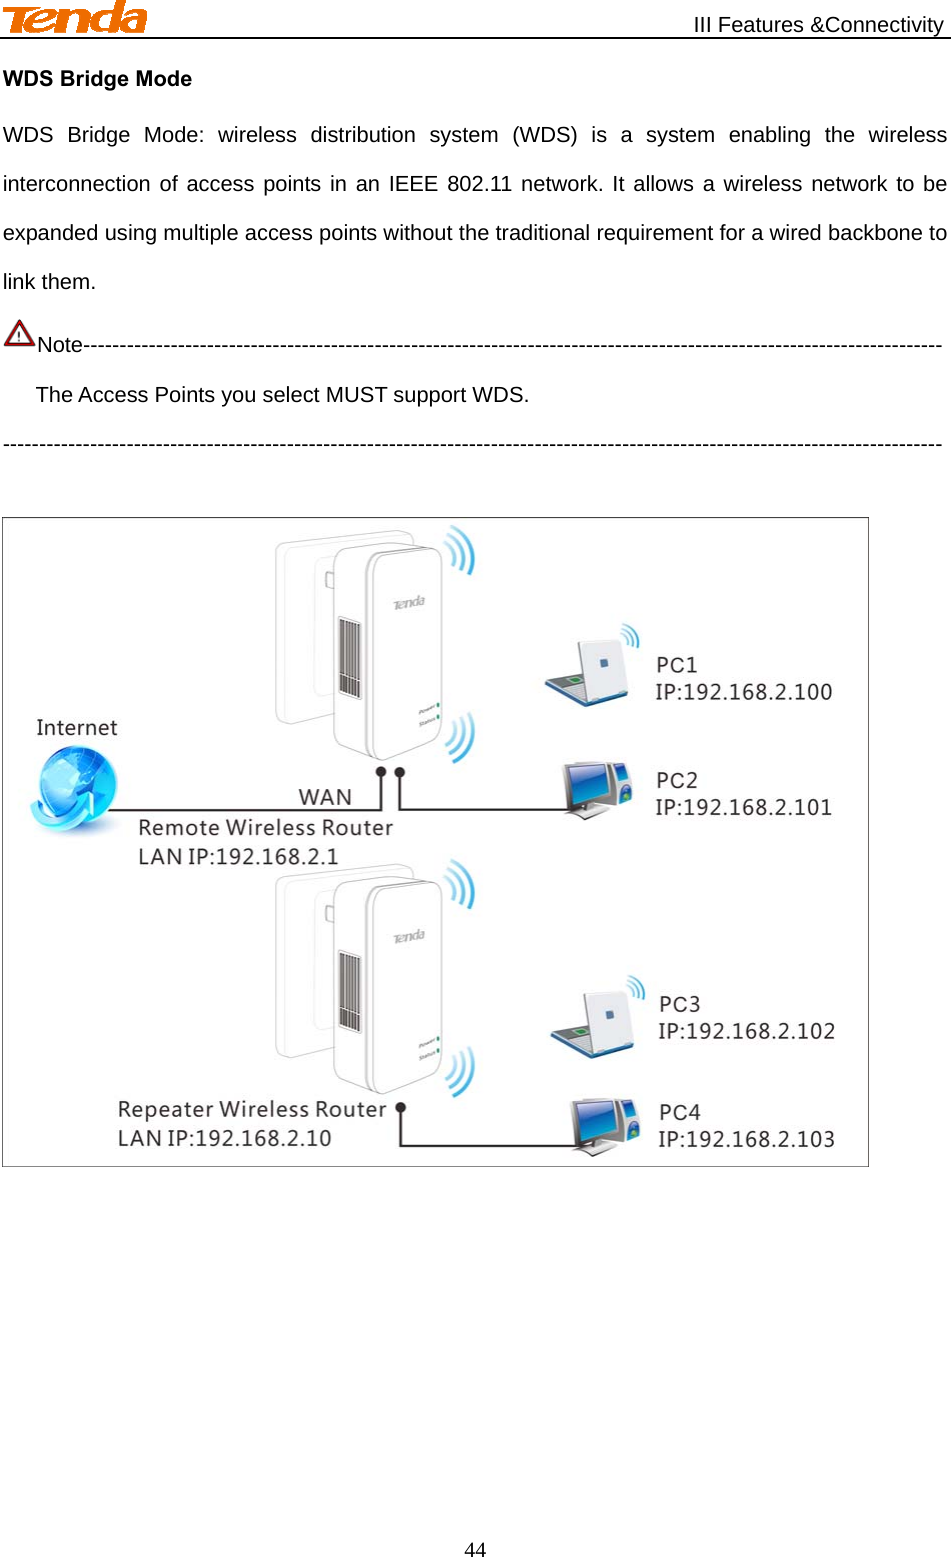                                                   III Features &amp;Connectivity 44 WDS Bridge Mode WDS Bridge Mode: wireless distribution system (WDS) is a system enabling the wireless interconnection of access points in an IEEE 802.11 network. It allows a wireless network to be expanded using multiple access points without the traditional requirement for a wired backbone to link them.   Note---------------------------------------------------------------------------------------------------------------------- The Access Points you select MUST support WDS. ---------------------------------------------------------------------------------------------------------------------------------   